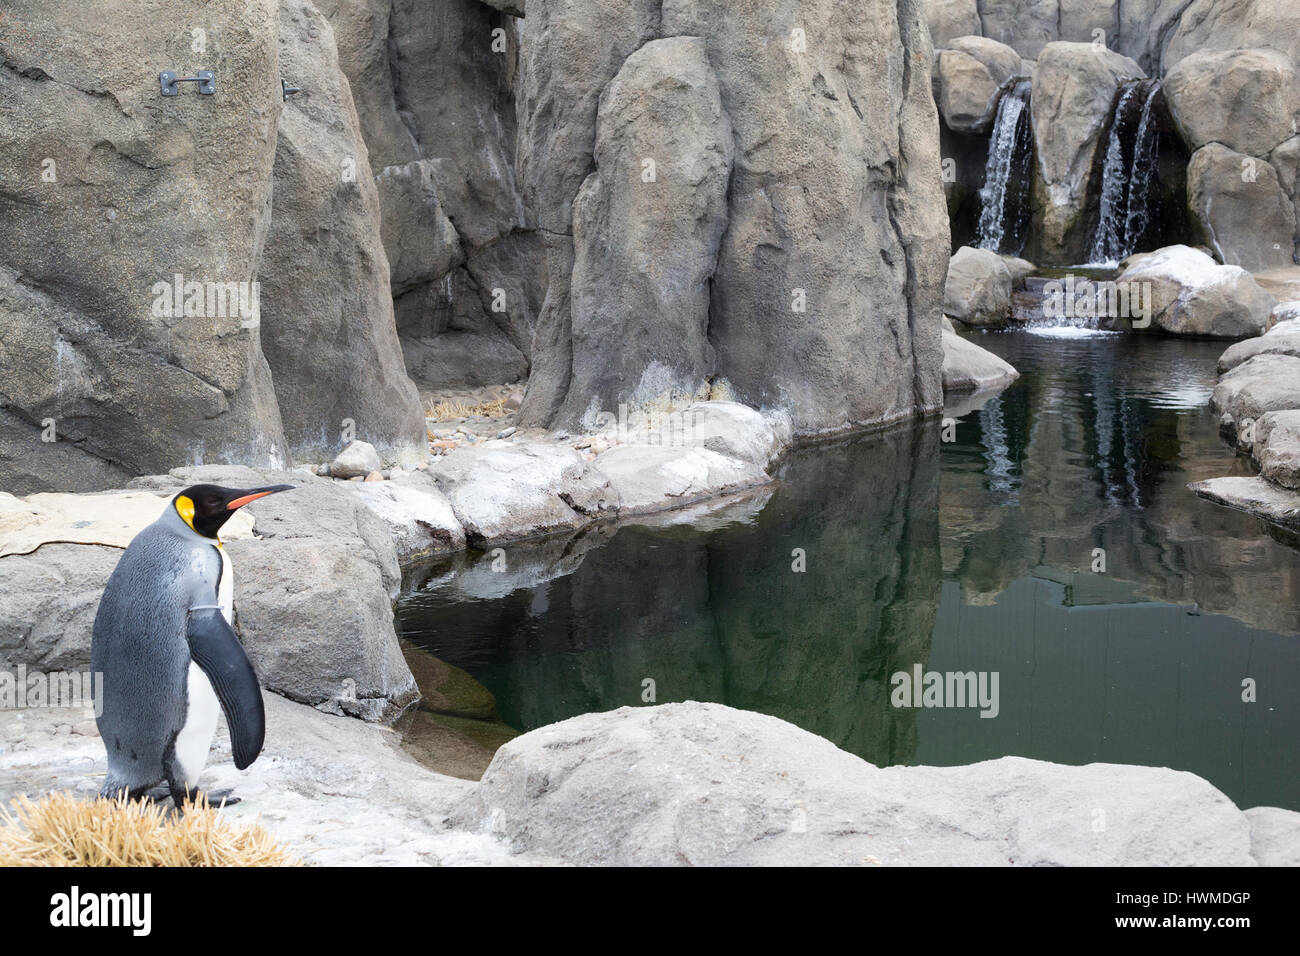 King penguin (Aptenodytes patagonicus) in outdoor enclosure with pool at the Calgary zoo. Stock Photo